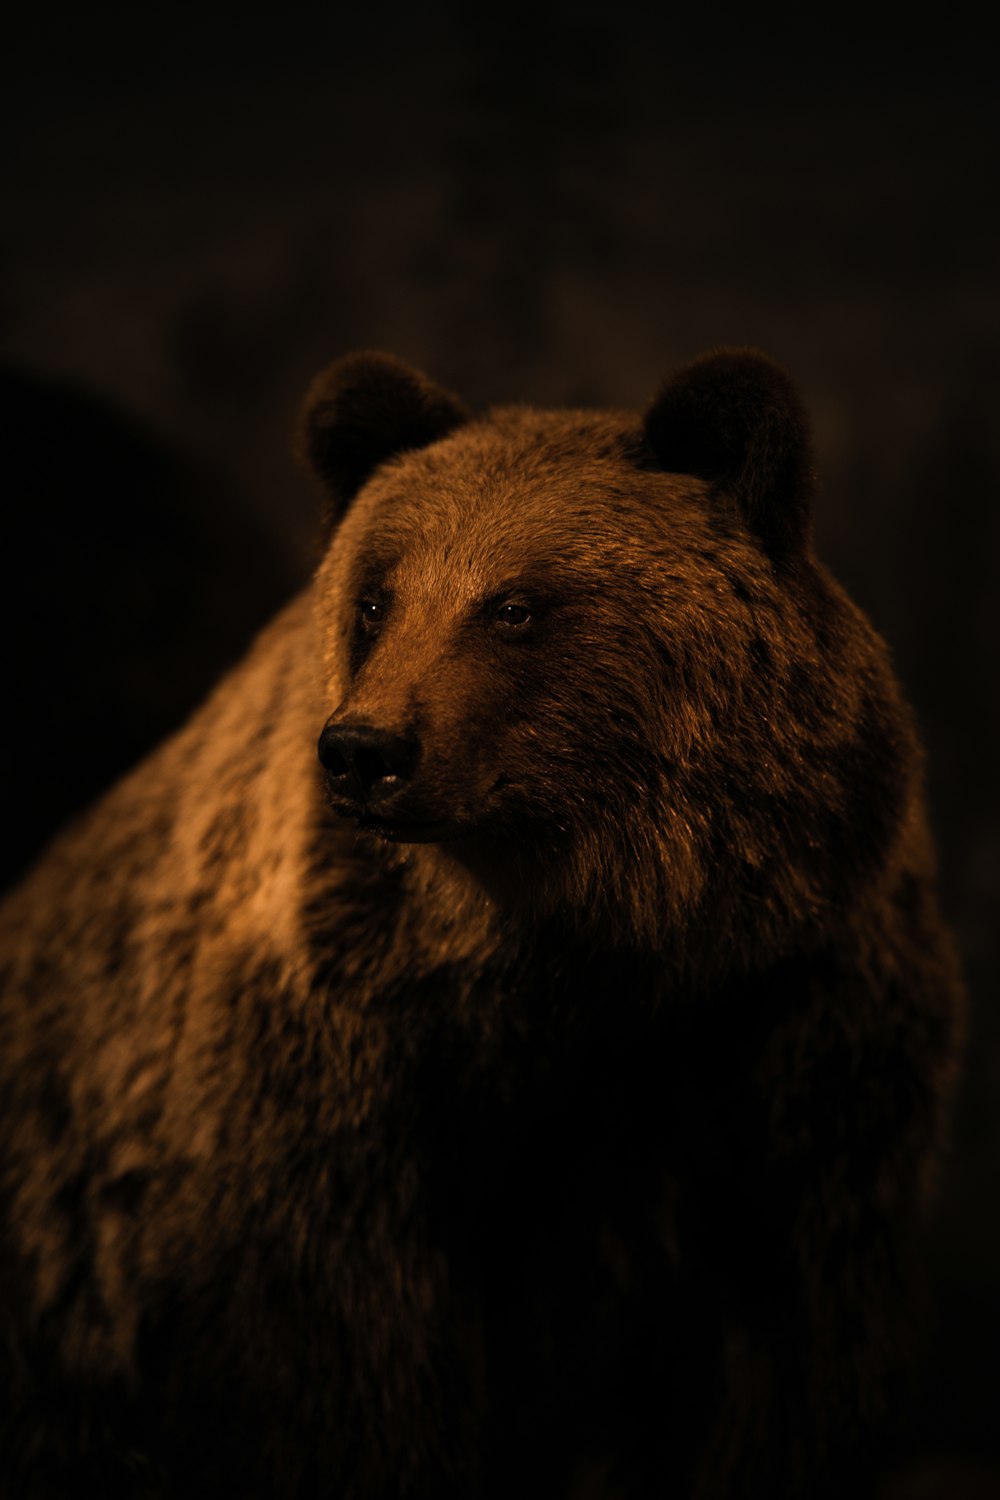 a close up of a brown bear in a dark room